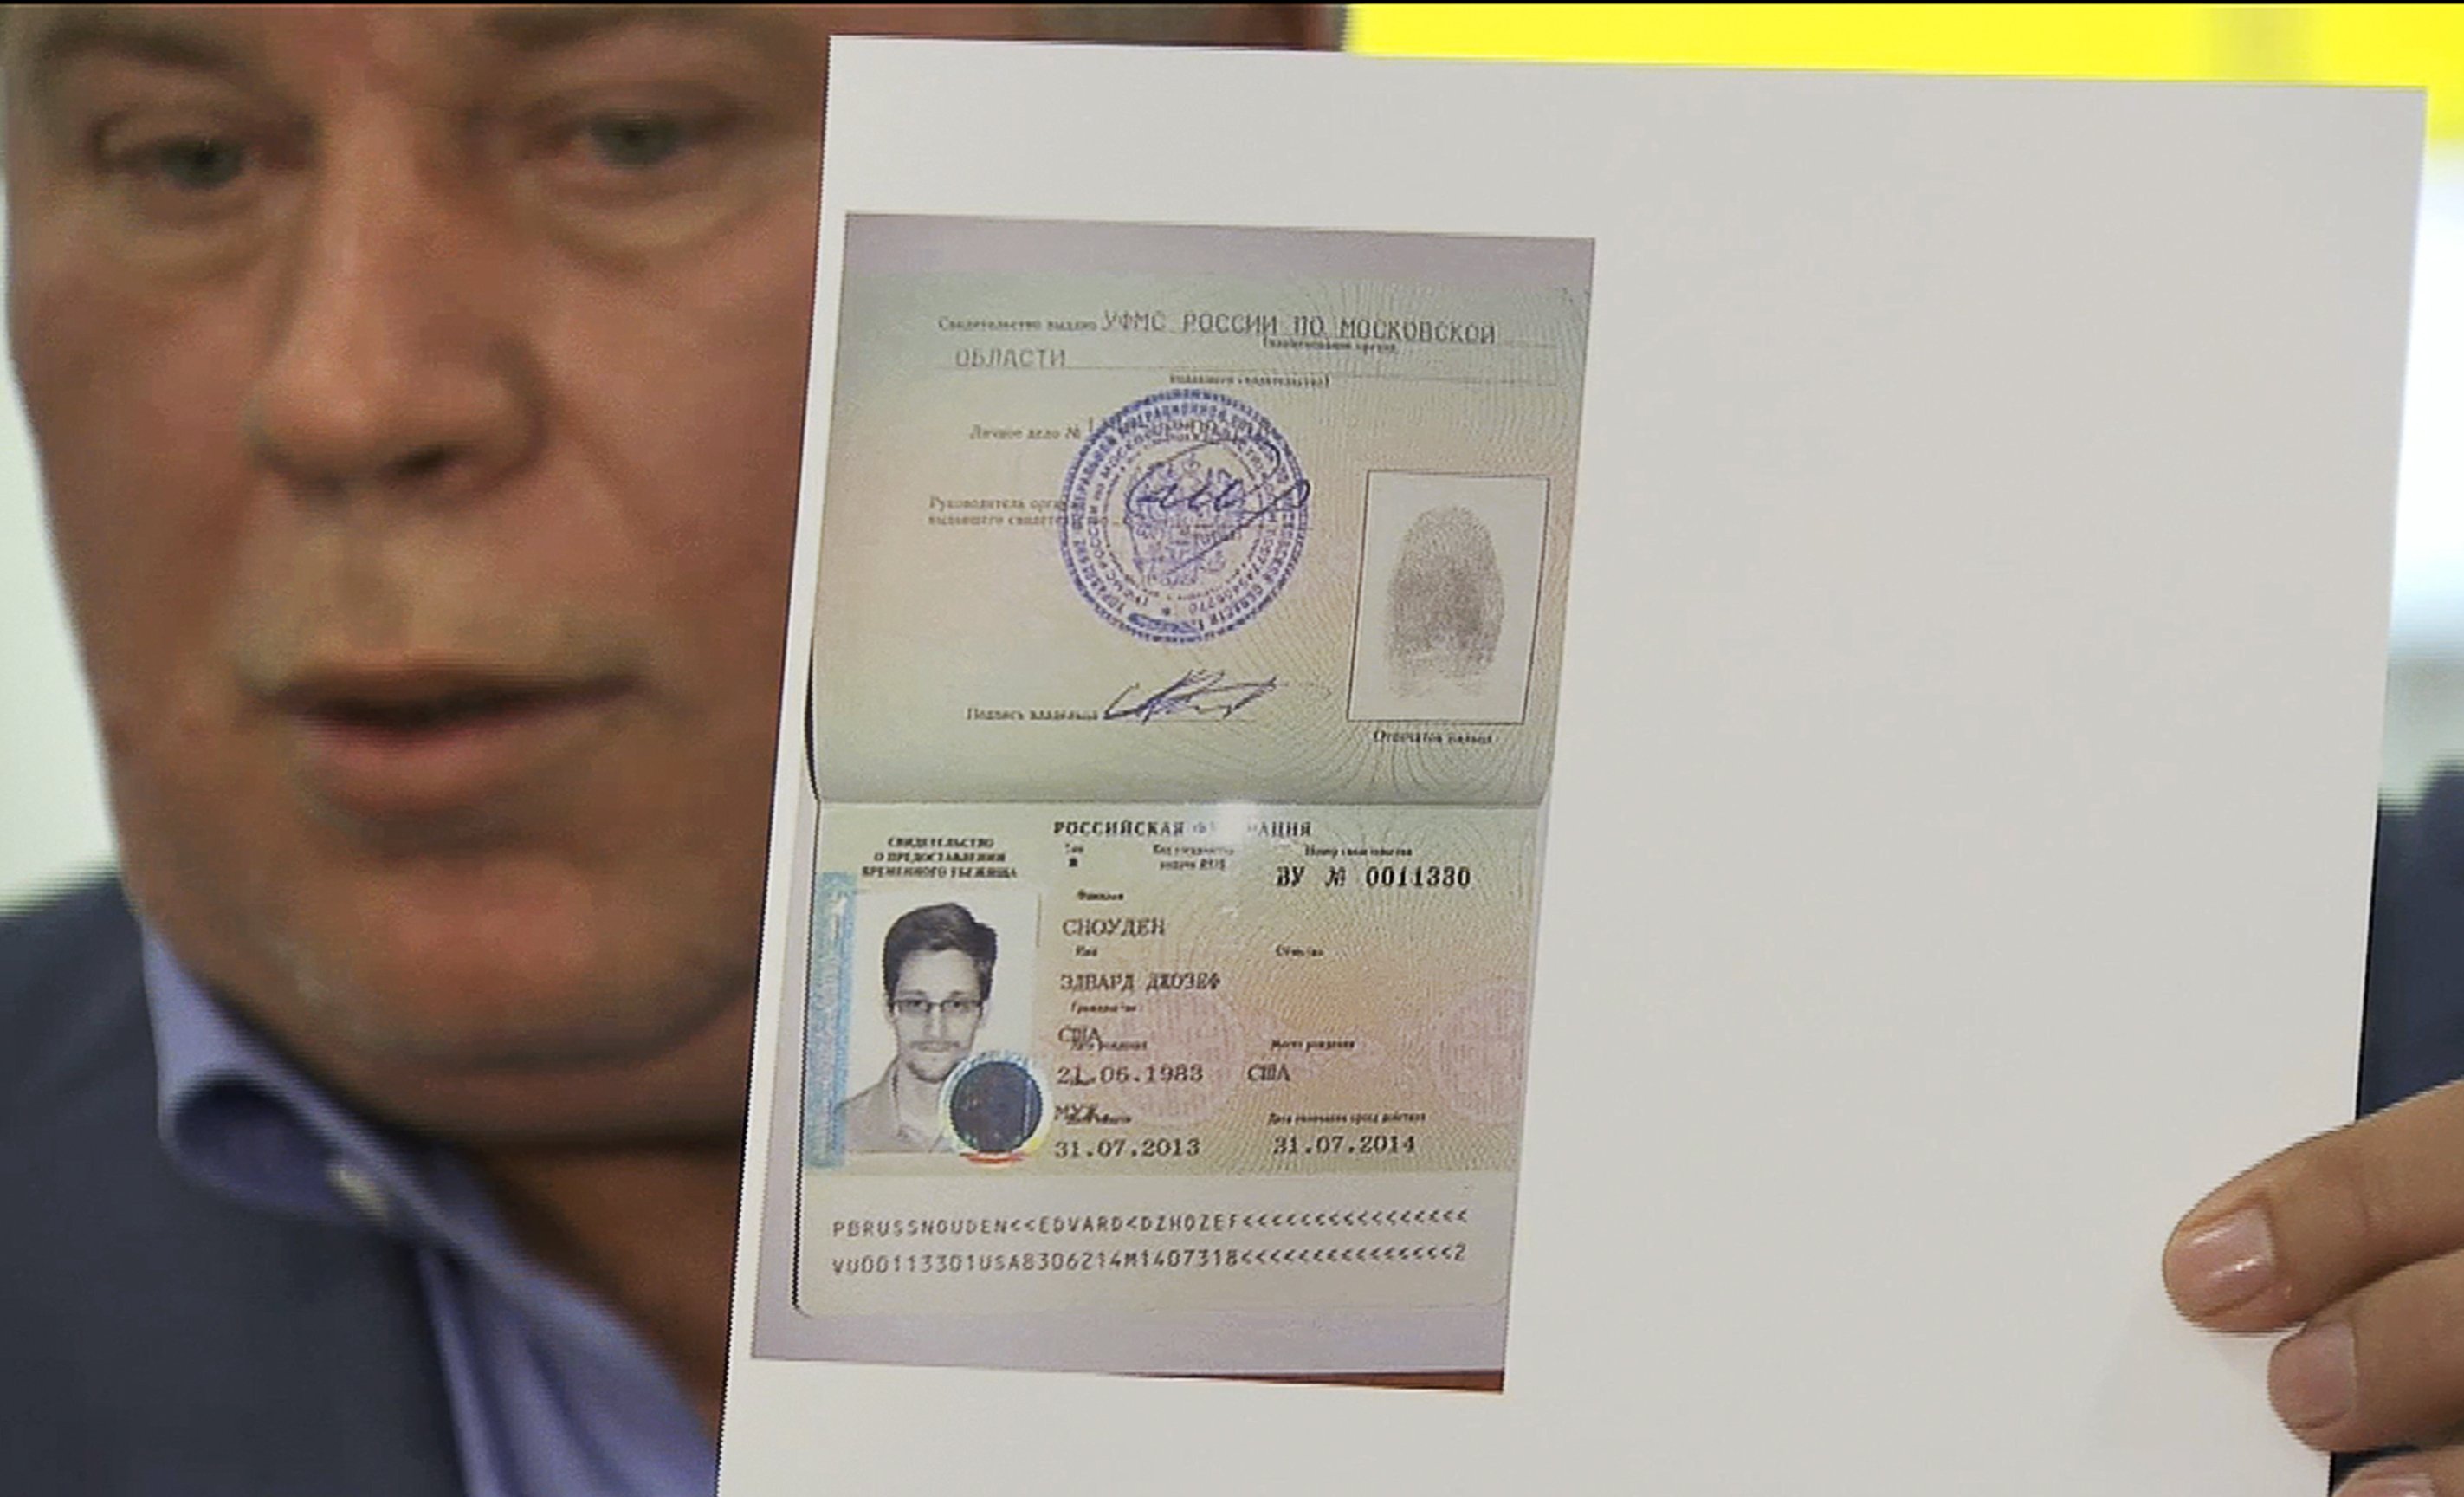 Russian lawyer Anatoly Kucherena showing a temporary document to allow Edward Snowden to cross the border into Russia. Photo: AP